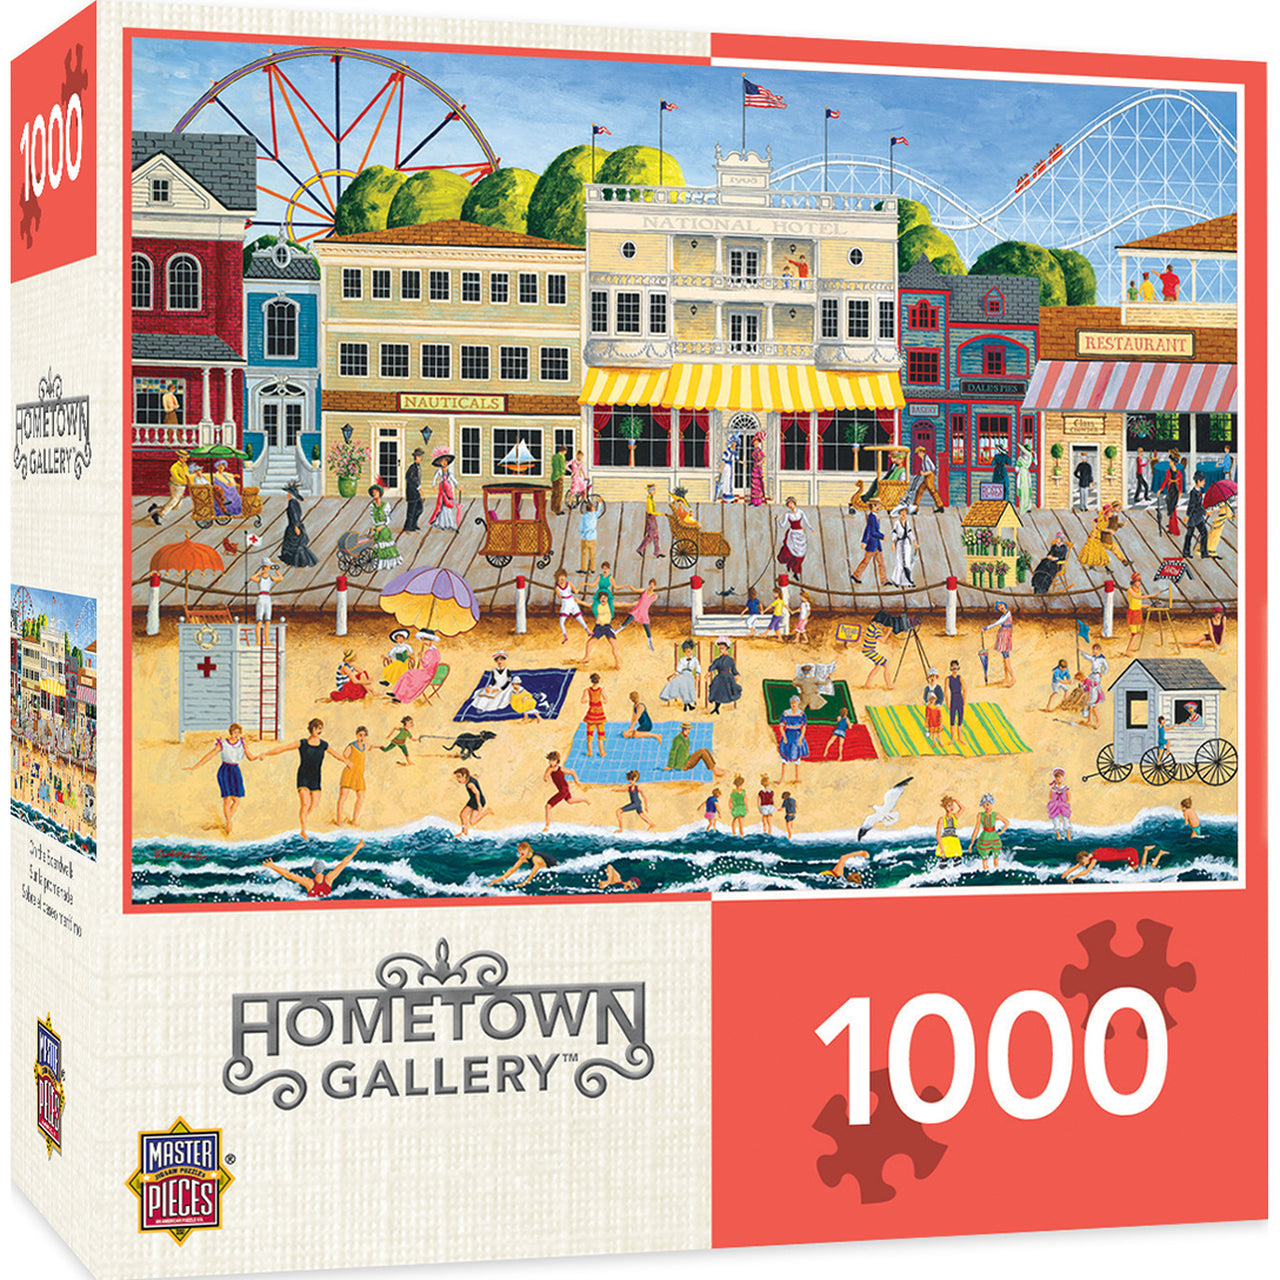 Hometown Gallery - On the Boardwalk 1000 Piece Jigsaw Puzzle by Masterpieces